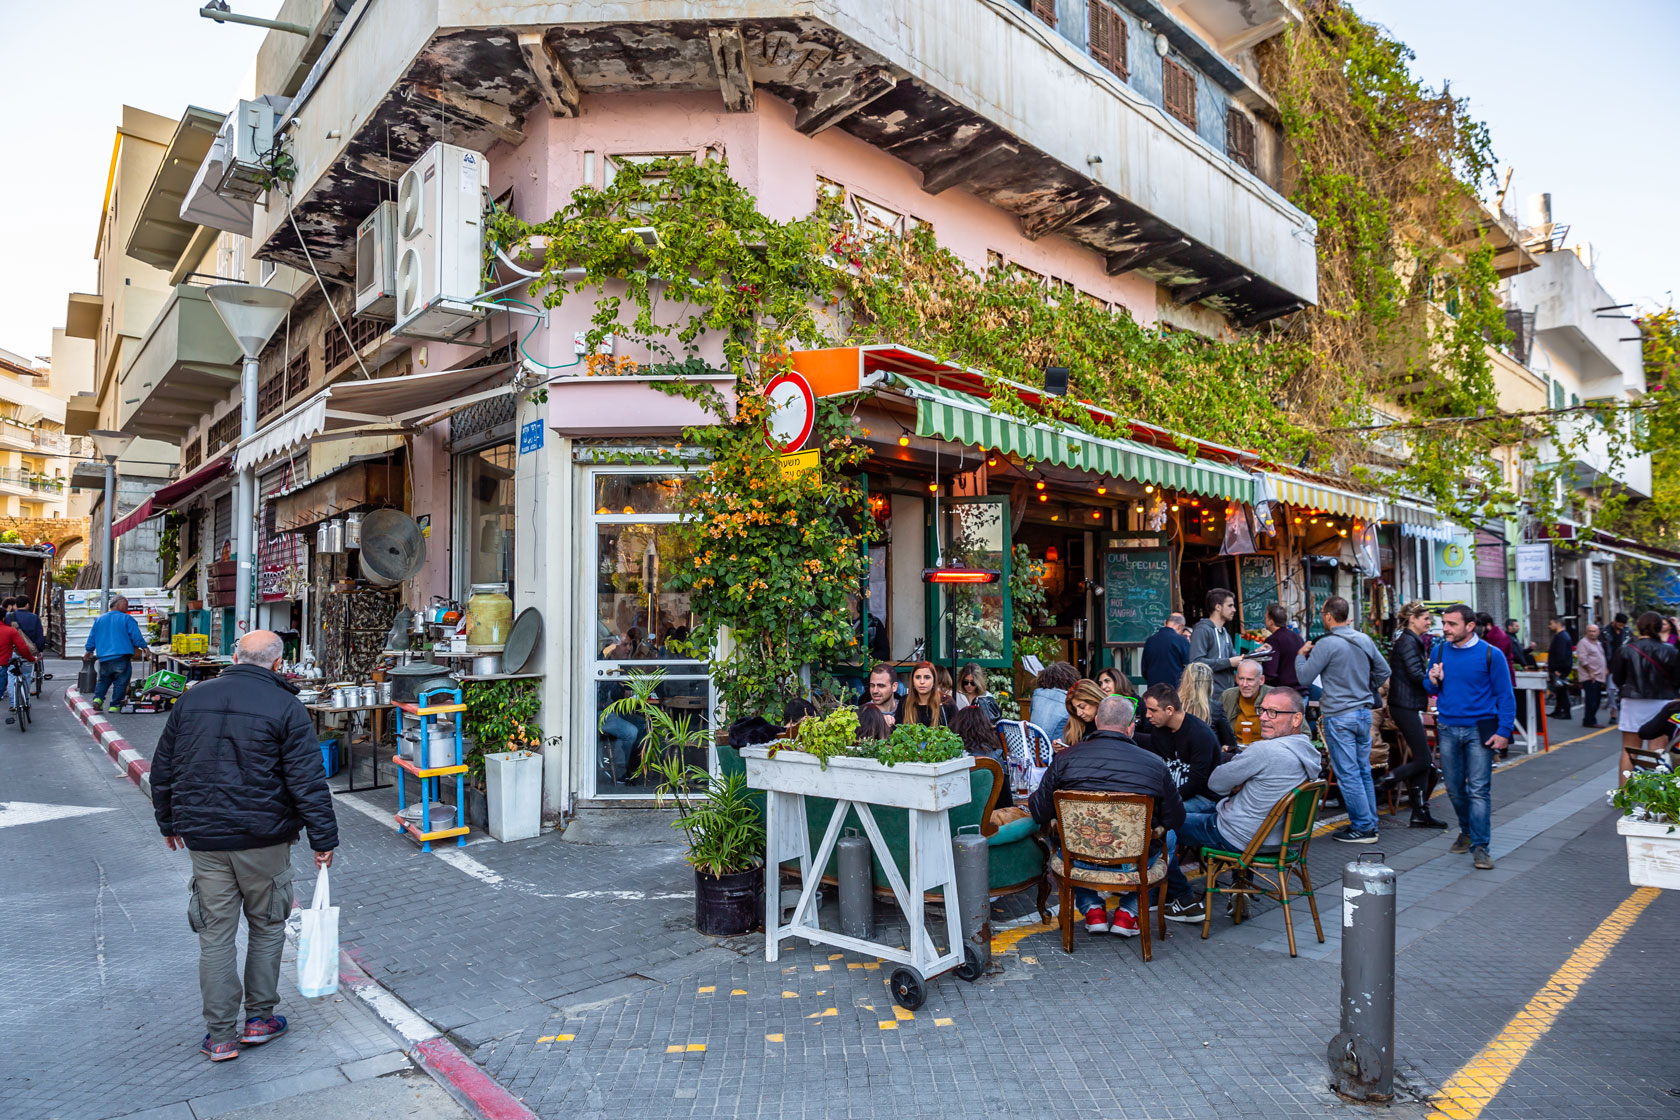 People eating at an outdoor cafe, Tel Aviv